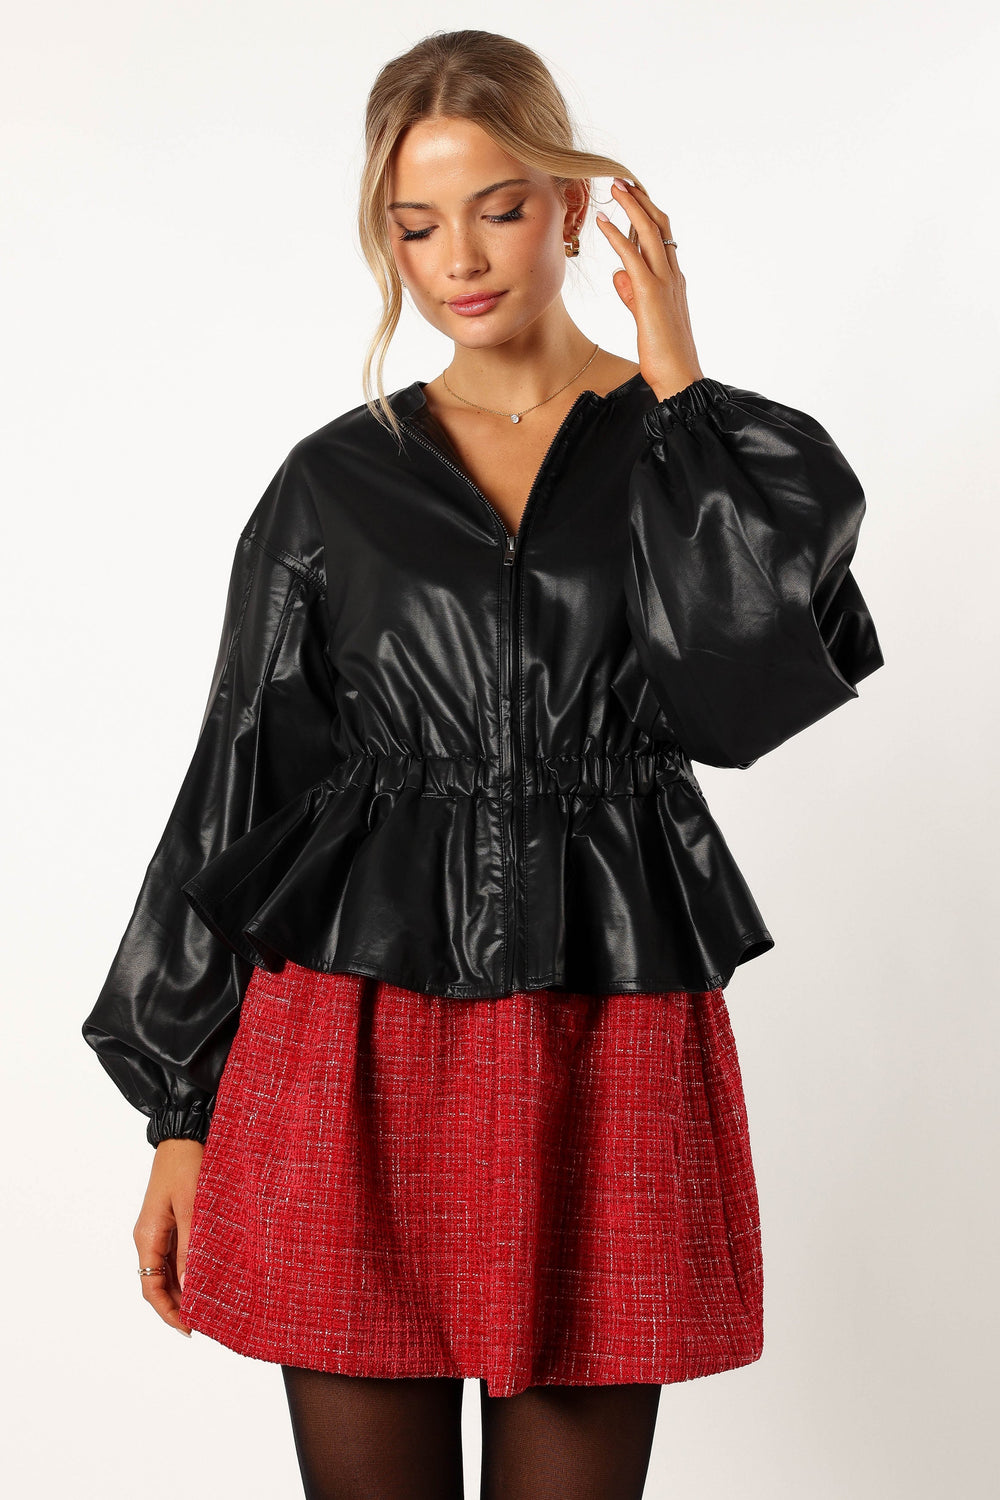 Petal and Pup USA OUTERWEAR Ivanna Faux Leather Puff Sleeve Jacket - Black